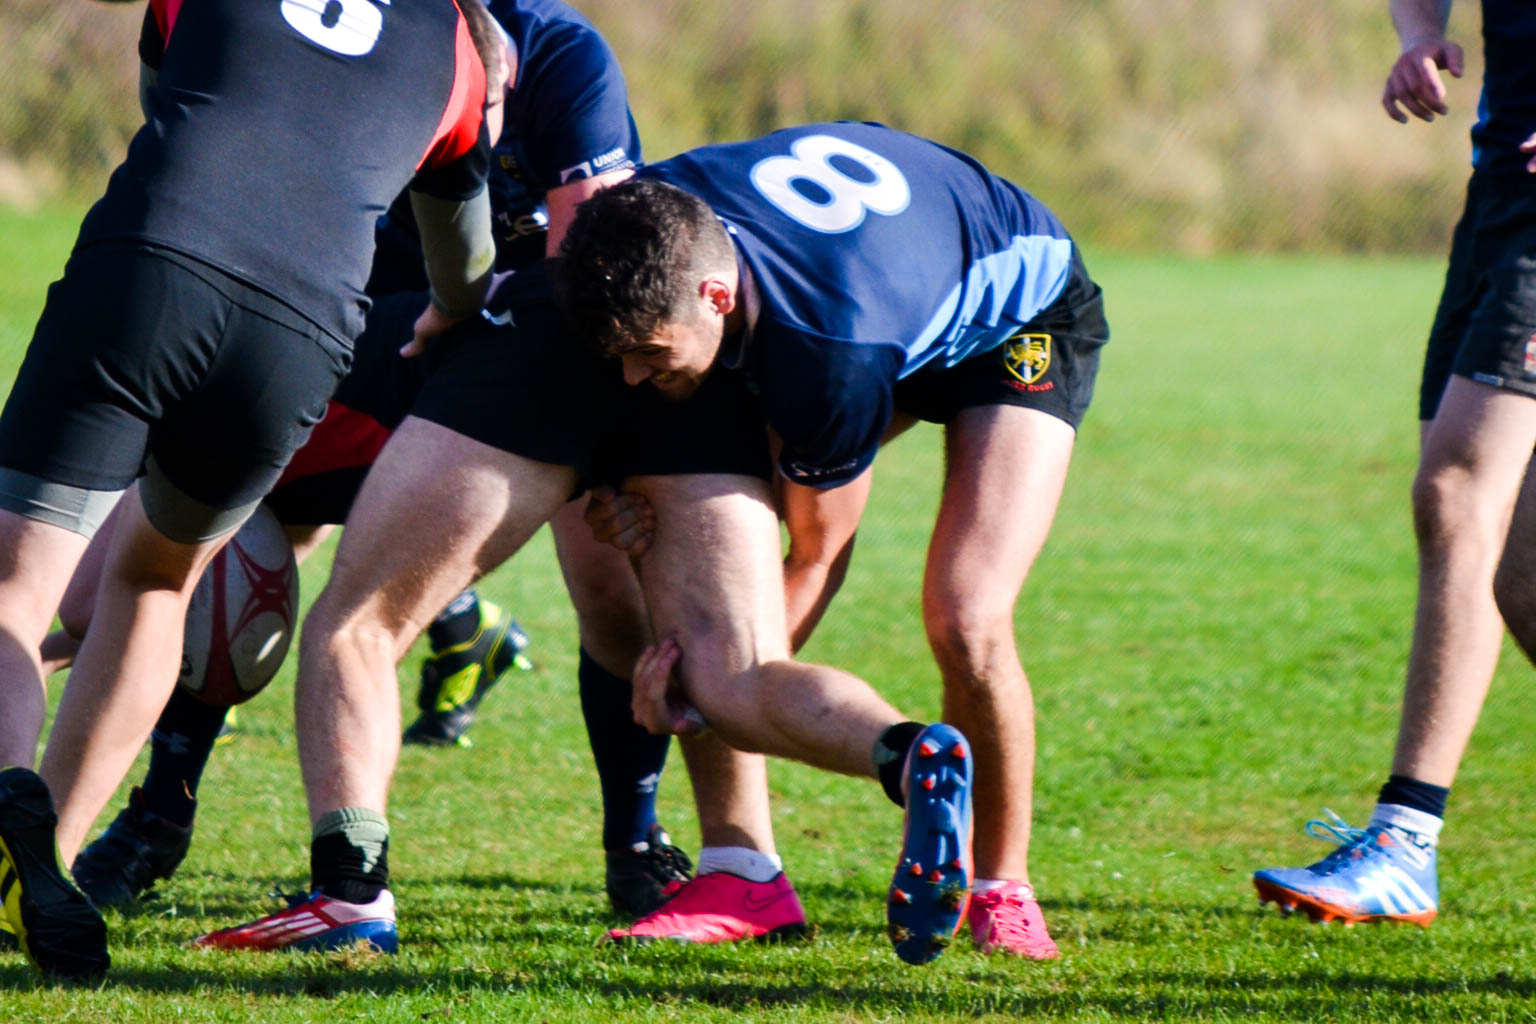 Kingston men’s rugby team emerge victorious in first game of season against Middlesex